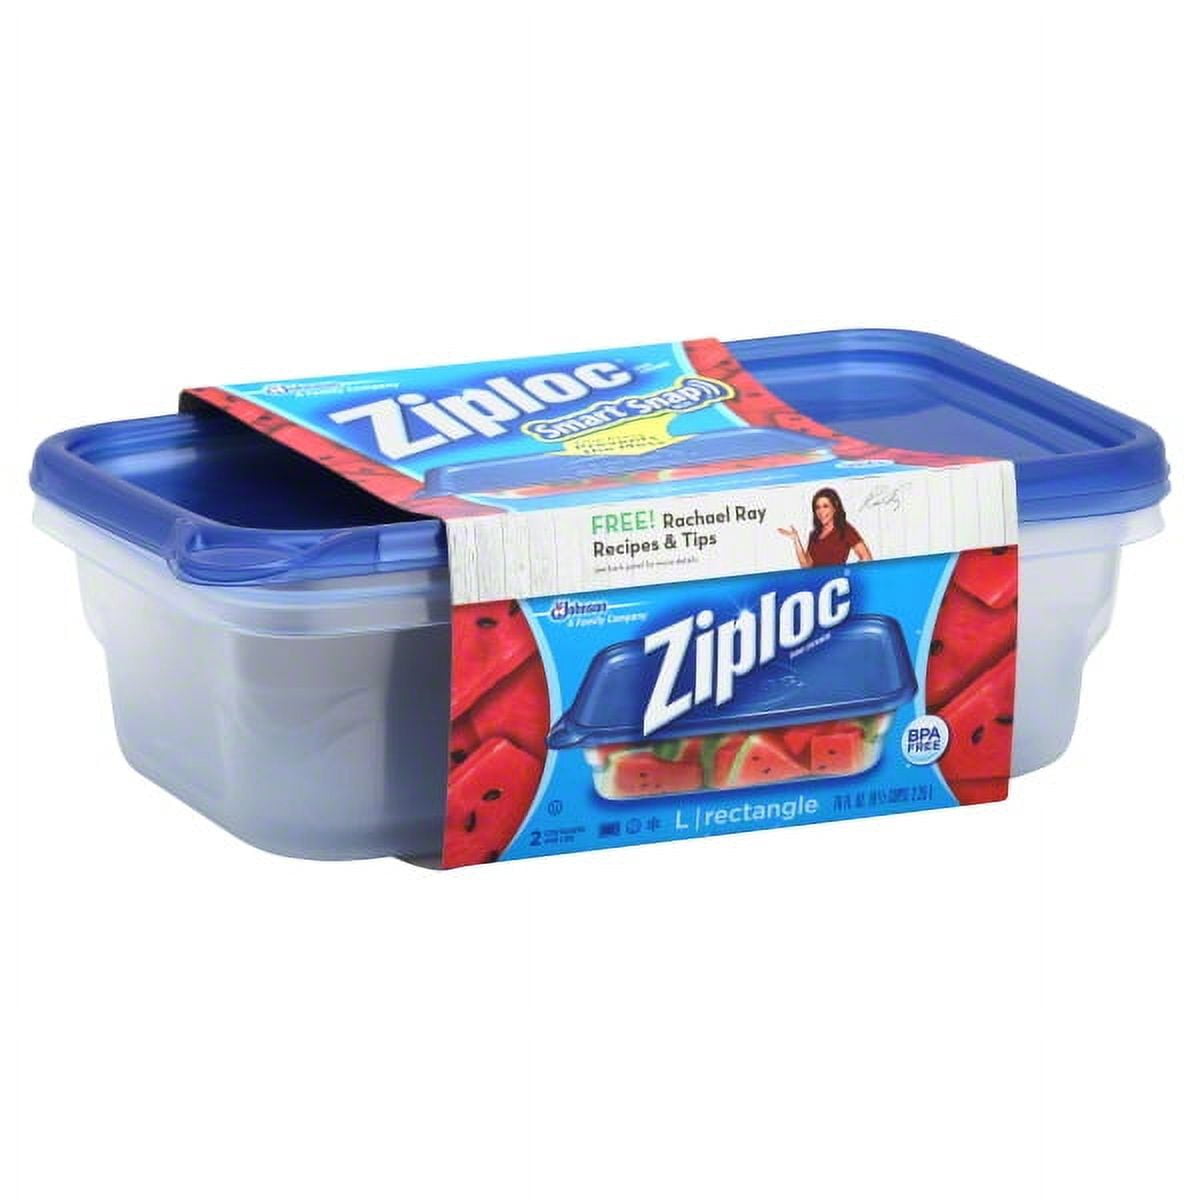 Ziploc Rectangle Containers With Smart Snap Technology - 2ct/48oz : Target